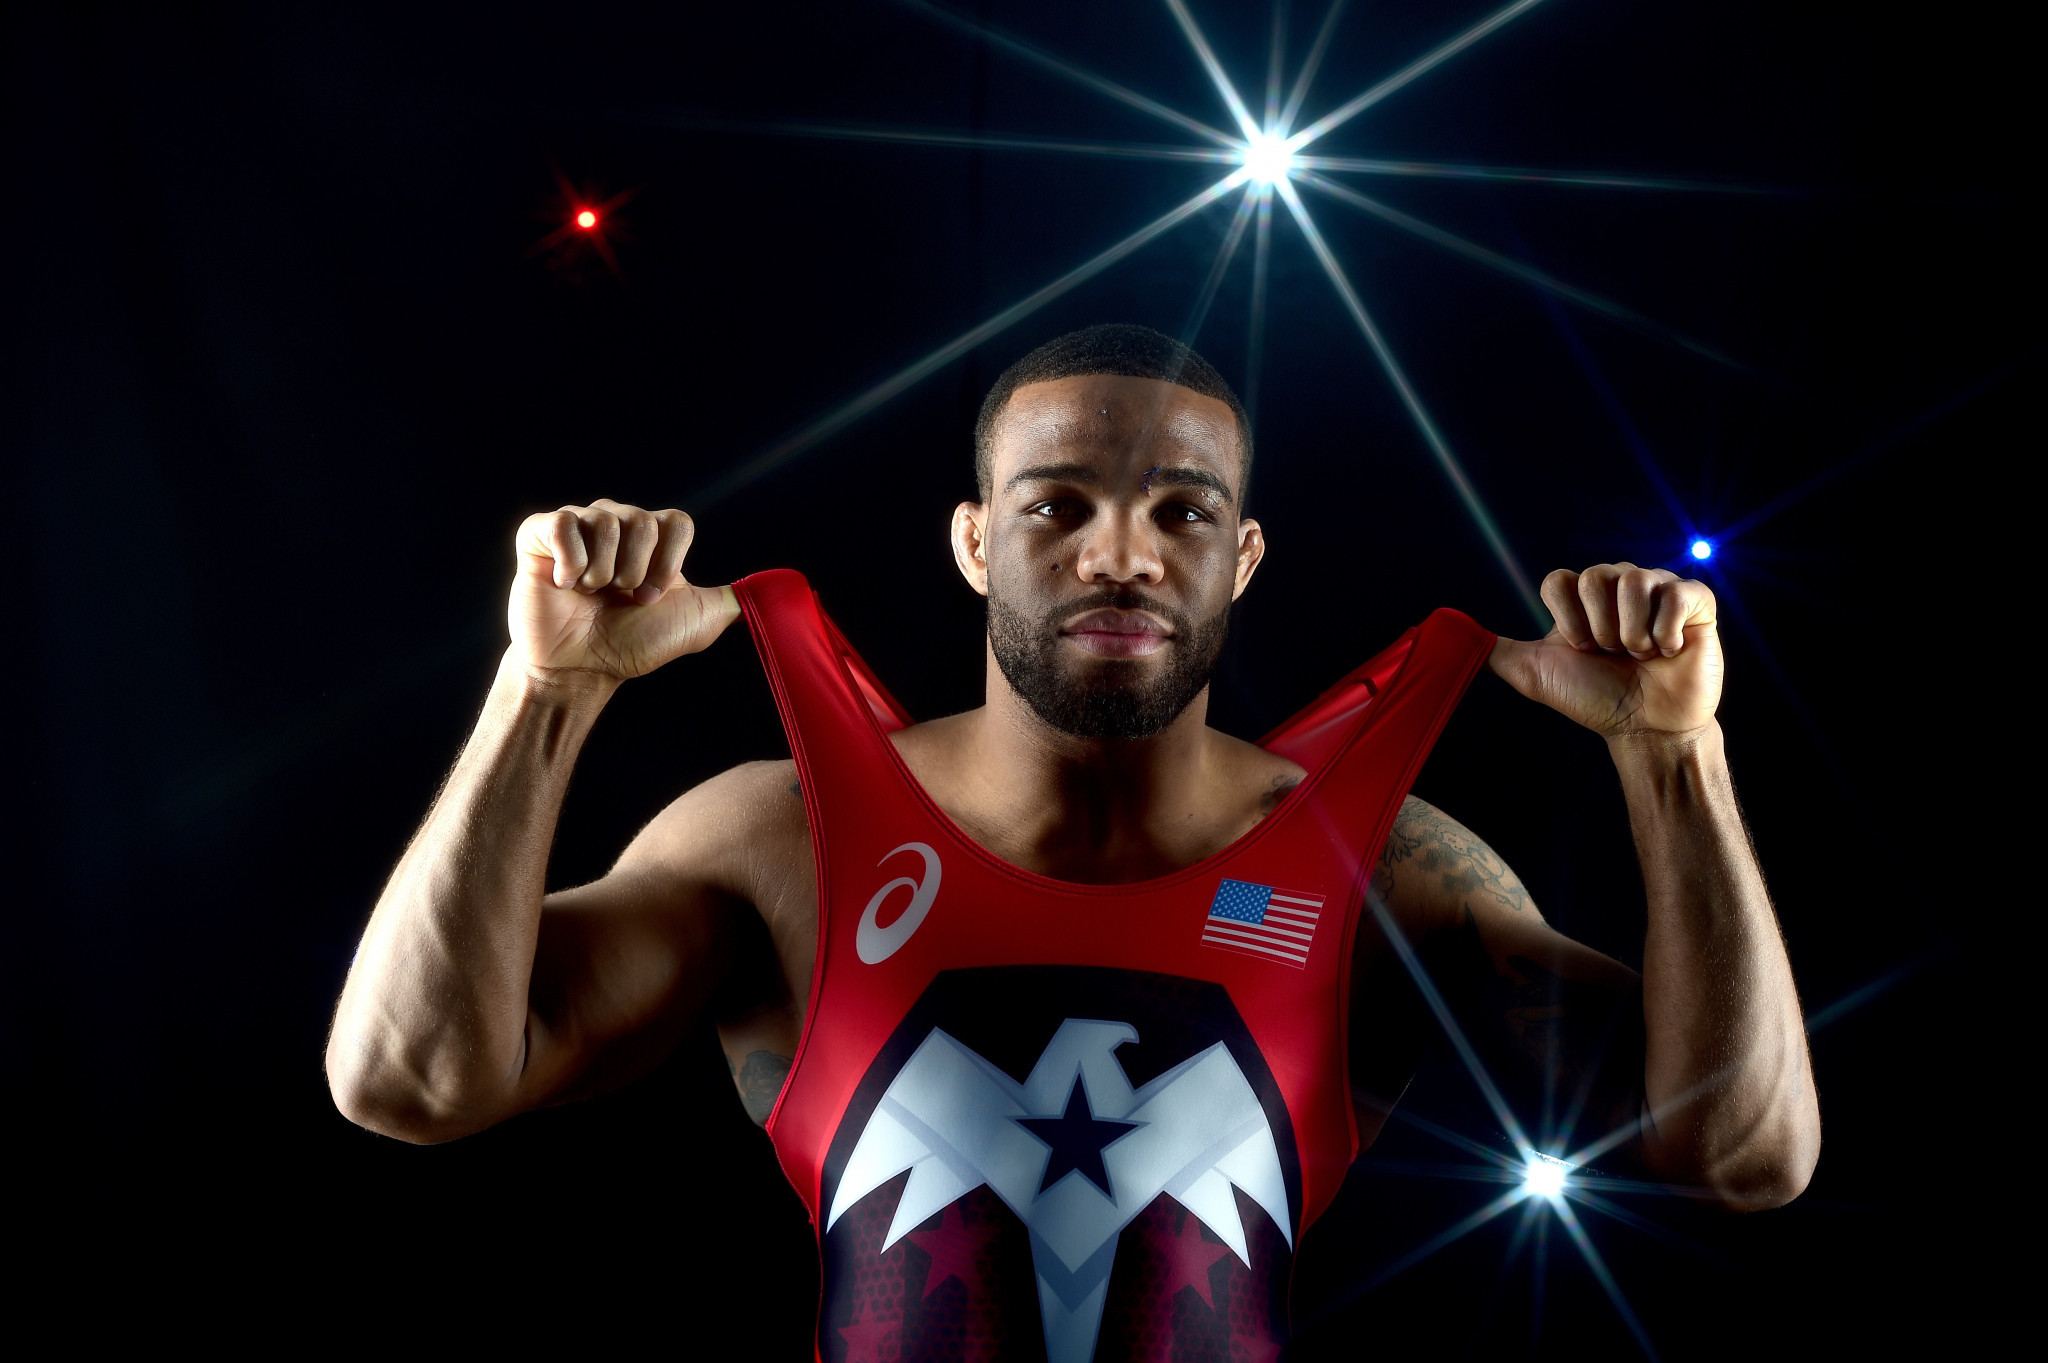 Jordan Burroughs is a four-time world champion ©Getty Images